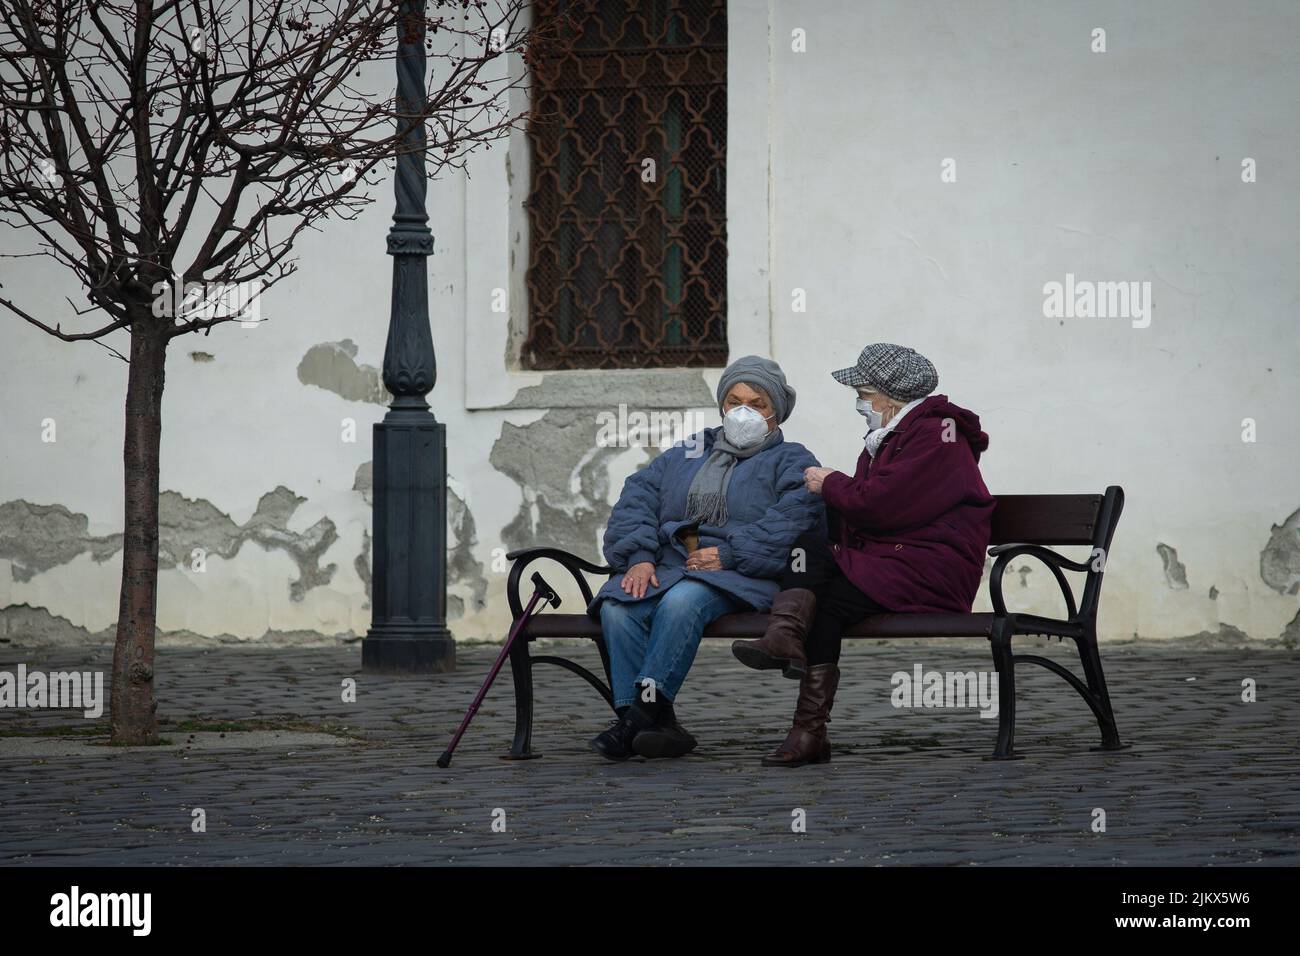 Óbuda, Hungary - Mar 21 2021: Two old ladies sitting on a bench and chatting during Covid time, wearing masks Stock Photo